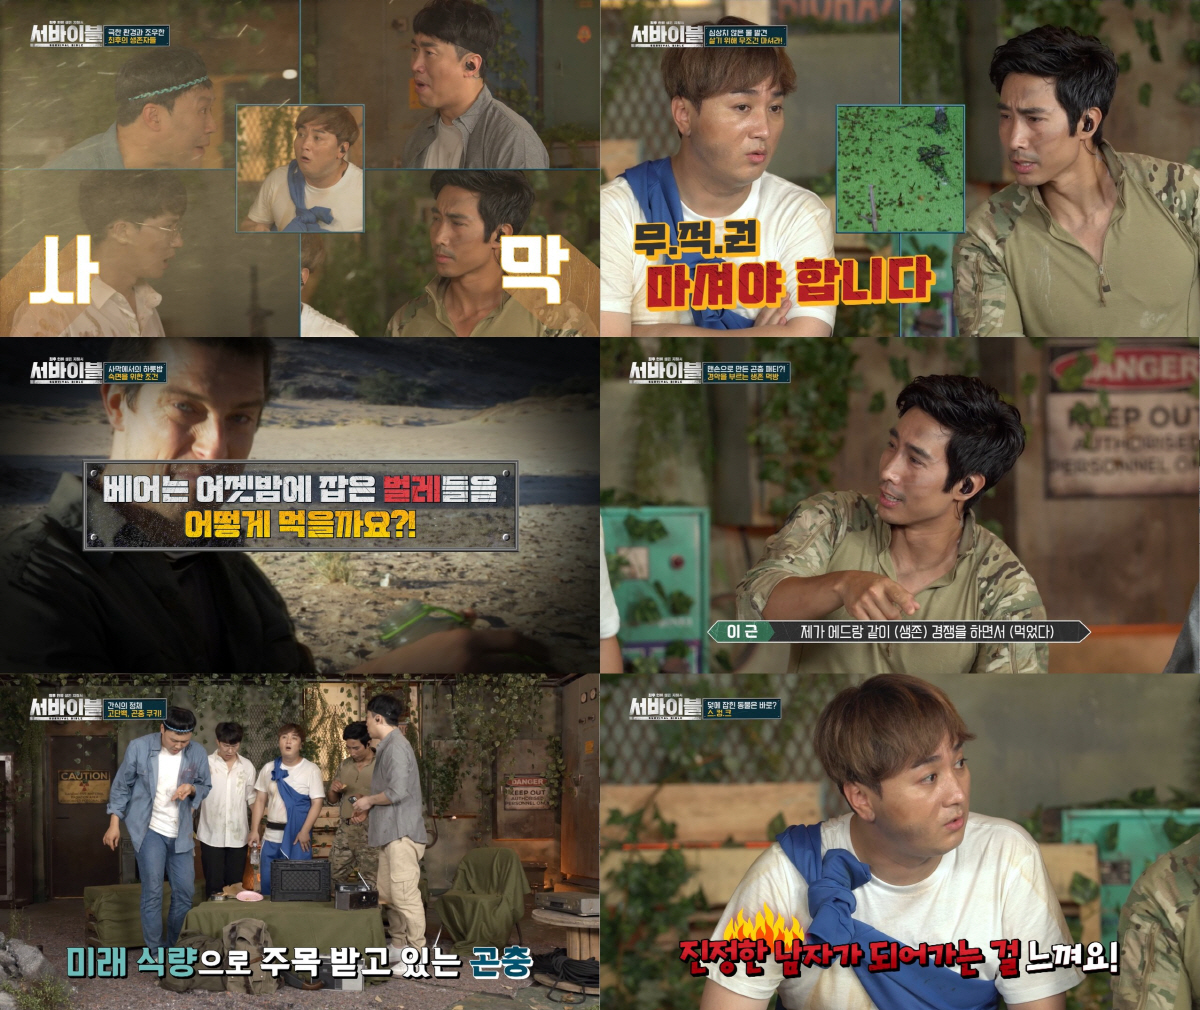 Its not a Survival audition. Its a Survival. Now, entertainment is moving into the Survival era.Following the real variety, observation entertainment, and audition entertainment, the era of Earth 2 entertainment is coming.The beginning of Earth 2entertainment is SBS The Law of the Jungle (hereinafter Ratio test).The Ratio test, which started in 2011, is the foundation of Earth 2 Entertainment, which has been going on so far.The program has been showing off Earth 2 as well as the cast, and it has been a lot of talk and trouble for 10 years.As the Corona 19 incident made it difficult to shoot overseas, the filming site was taken to Korea and entered the second stage of Earth in Korea.With the title of Ratio test in Wild Korea, sports star Pak Se-ri Park Chan-ho Huh Jae Huh Hoon Chu Sung-hoon has been receiving a good response with a rating of around 10%.MBC Everlon started Yot Expedition starring Jin Goo Choi Siwon Chang Kiha Song Ho Jun.The Yot Expedition, which started in mid-August, is a documentary entertainment program that shows the process of challenging the Pacific Ocean voyage by four men who dreamed of adventure on a yacht.It is a process of experiencing nature and finding the hope and value of life in the journey to Pacific Ocean on a yacht.In fact, yachts were considered high-end sports, but yachts in the Yot Expedition are close to Earth 2 games.Jin Goo, a Navy native, Choi Siwon, Chang Kiha, who is known to enjoy a rugged natural trip, and Song Ho-joon, the wrong 4-dimensional engineering giant who succeeded in launching the worlds first personal satellite project.From the start of the broadcast, they faced waves of seasickness, vomiting, heavy rains and typhoons.Confident Jin Goo shouted Let me live and Choi Siwon also visited the hospital with sudden urticaria.The members of the team who endure the hardships with teamwork are giving the viewers a warm heart.Entertainment Top-trend platform YouTube is also dominated by Earth 2 Entertainment content.Webentertainment Fake Man hit big hit with six YouTubers training for Earth 2 as they were trained by UDT instructors.The first episode of Fake Man, a parody of the title of entertainment real man, which depicts entertainers enlisting in the military, attracted a great deal of attention with more than 12 million views.Lee, who was a UDT instructor who appeared in Fake Man, also appeared as a fixed member in the original entertainment Survival of the newly launched Discovery Channel.Survival is an entertainment that depicts the activities of five Earth 2-party Lee Geun, Hwang Sung, Kim Yong Myung, Sung Seung Heon and Lim Hyun Seo to survive in the earth that suddenly turned into a desert due to climate change.Earth 2 experts Ed Stafford and Bear Grills have also appeared.Entertainments, which have recently collected topics, are based on the concept of fierce Earth 2.It is not just showing Earth 2, but showing the actual experience and getting favorable to viewers.Earth 2s problem with Corona 19 has become a social issue, and thats one of the reasons Earth 2 Entertainment is in the spotlight.Of course, if there is no authenticity, there is a possibility that you will be caught up in various controversies like Ratio test.It is likely that Earth 2 Entertainment will be alive and dead because of how much more extreme it will lead to and more stimulating it.